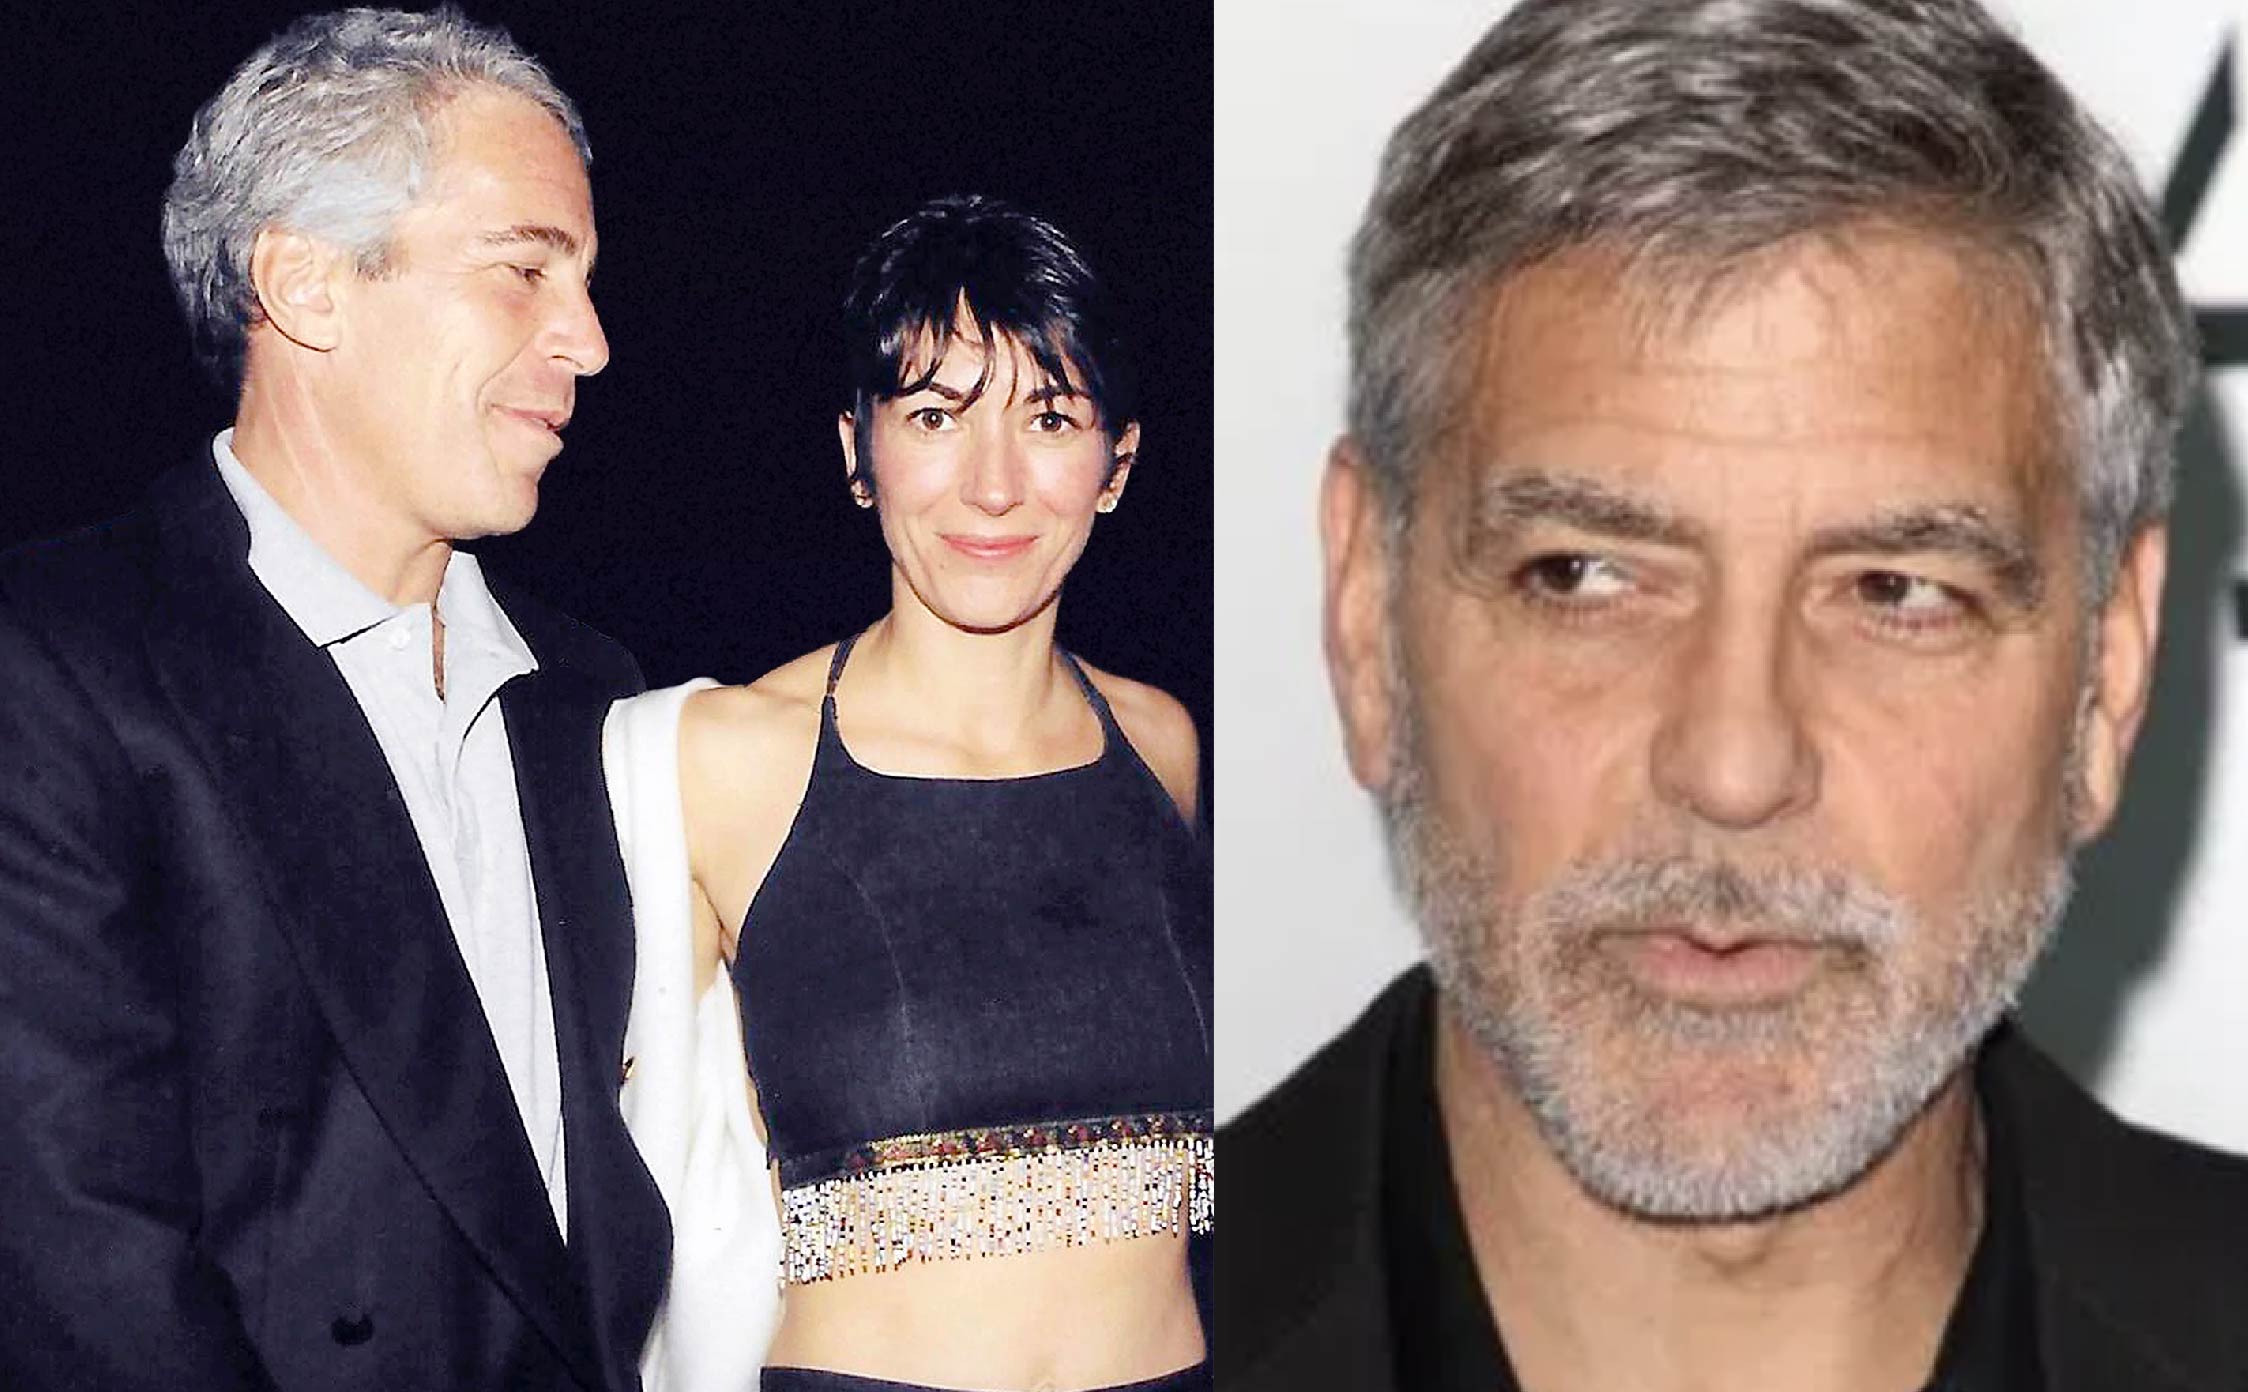 Report: Bombshell Accusation Puts George Clooney Smack Dab in the Middle of Epstein's Illegal "Sex Cabal"